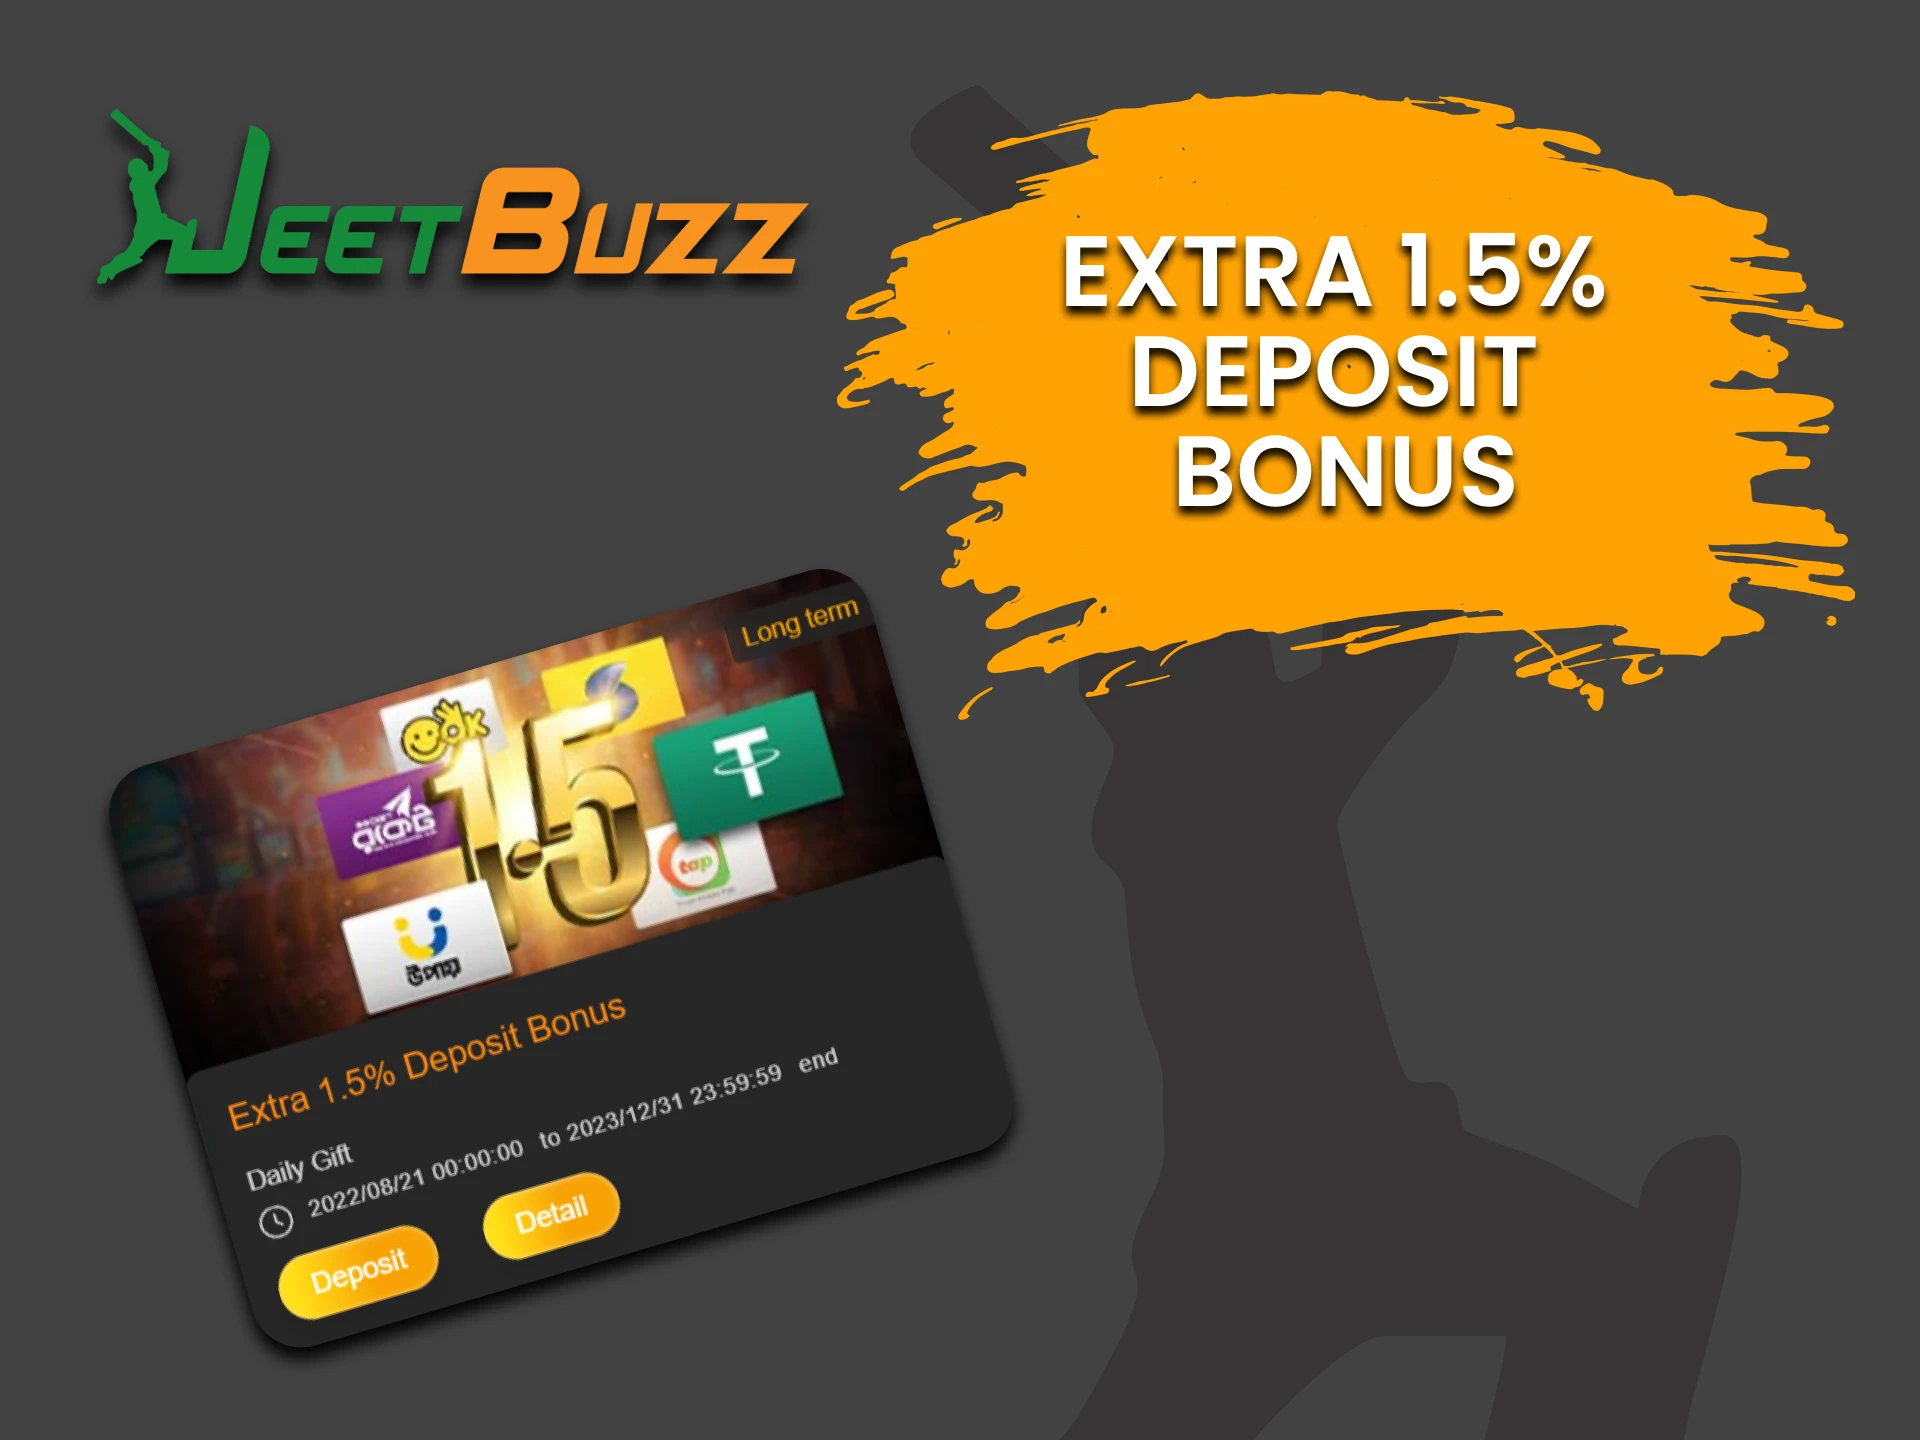 Get an extra deposit bonus from JeetBuzz for playing Roulette.